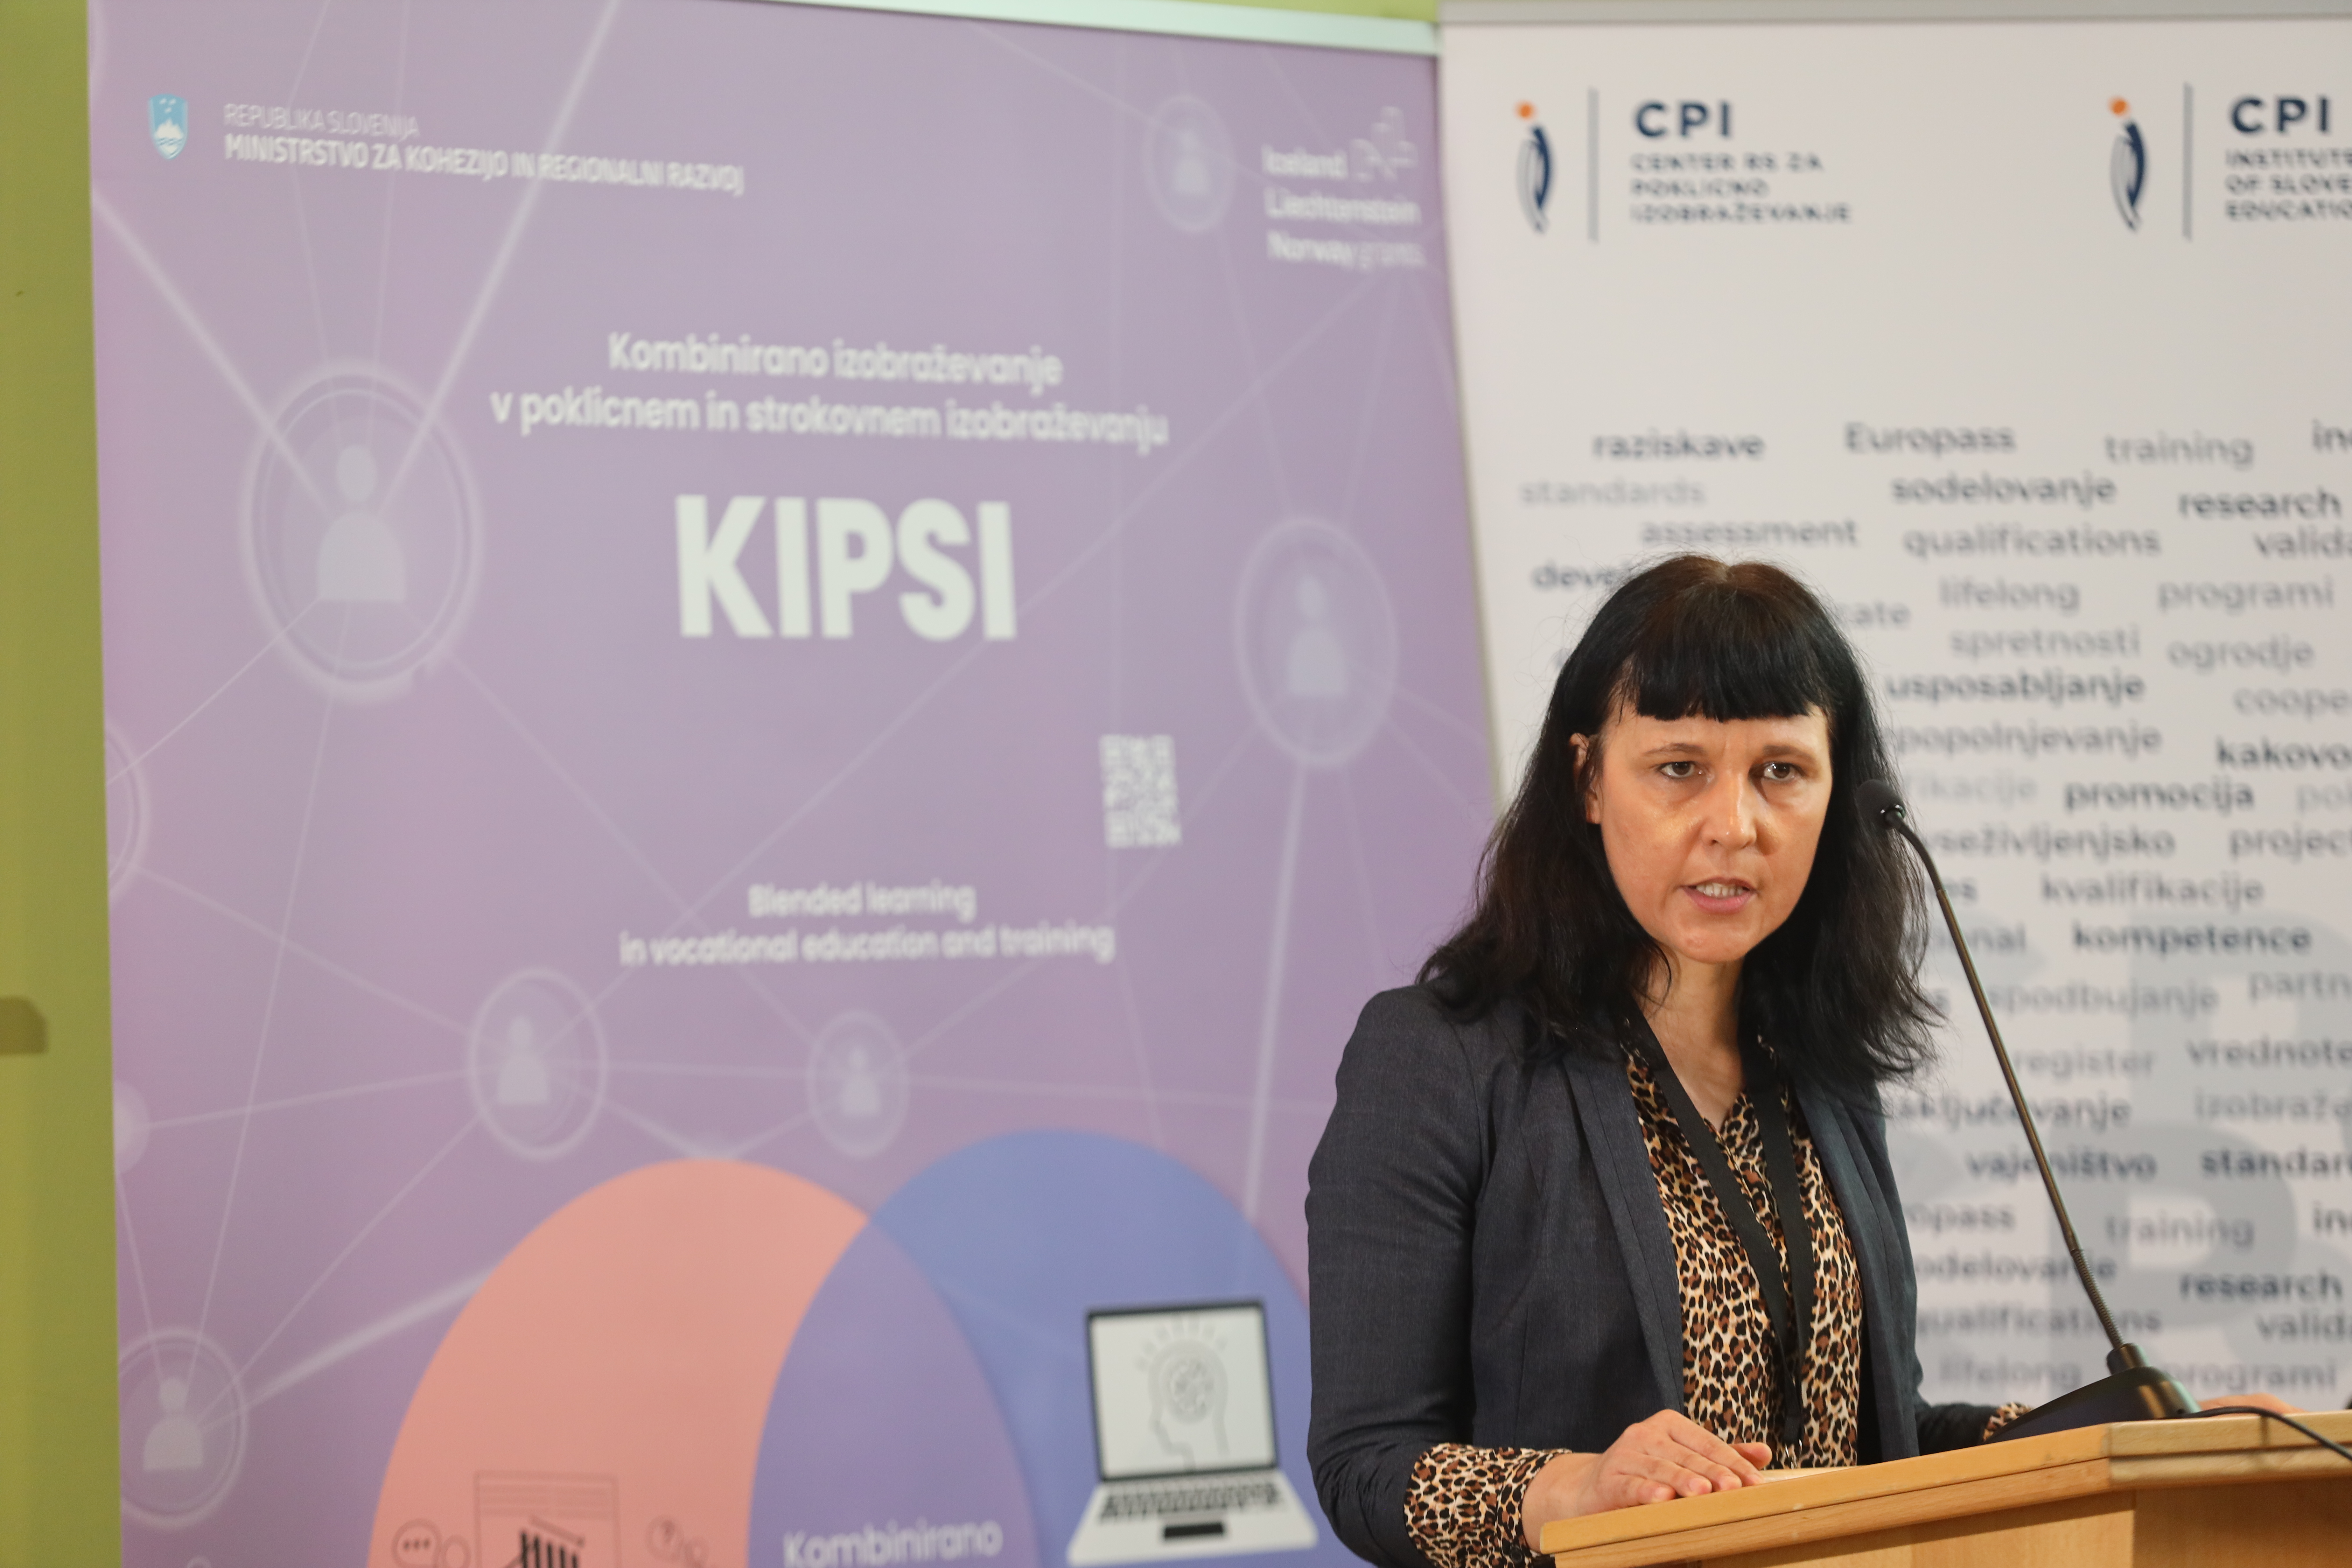 Jadranka Plut, Head of the Financial Mechanisms Division at the Ministry of Cohesion and Regional Development, on stage during the opening speech.